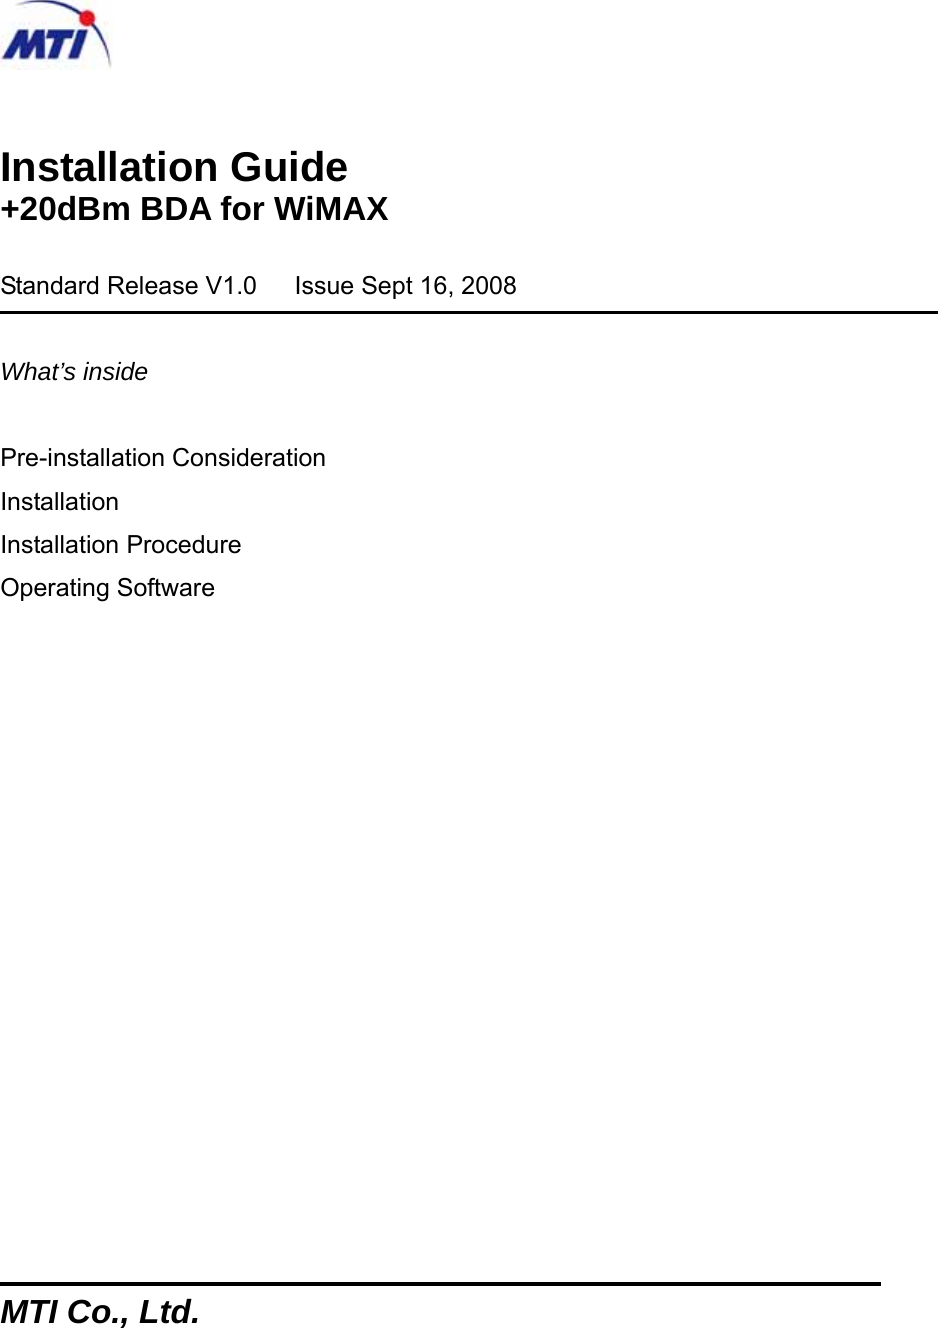    Installation Guide +20dBm BDA for WiMAX  Standard Release V1.0      Issue Sept 16, 2008  What’s inside  Pre-installation Consideration Installation Installation Procedure Operating Software                MTI Co., Ltd. 